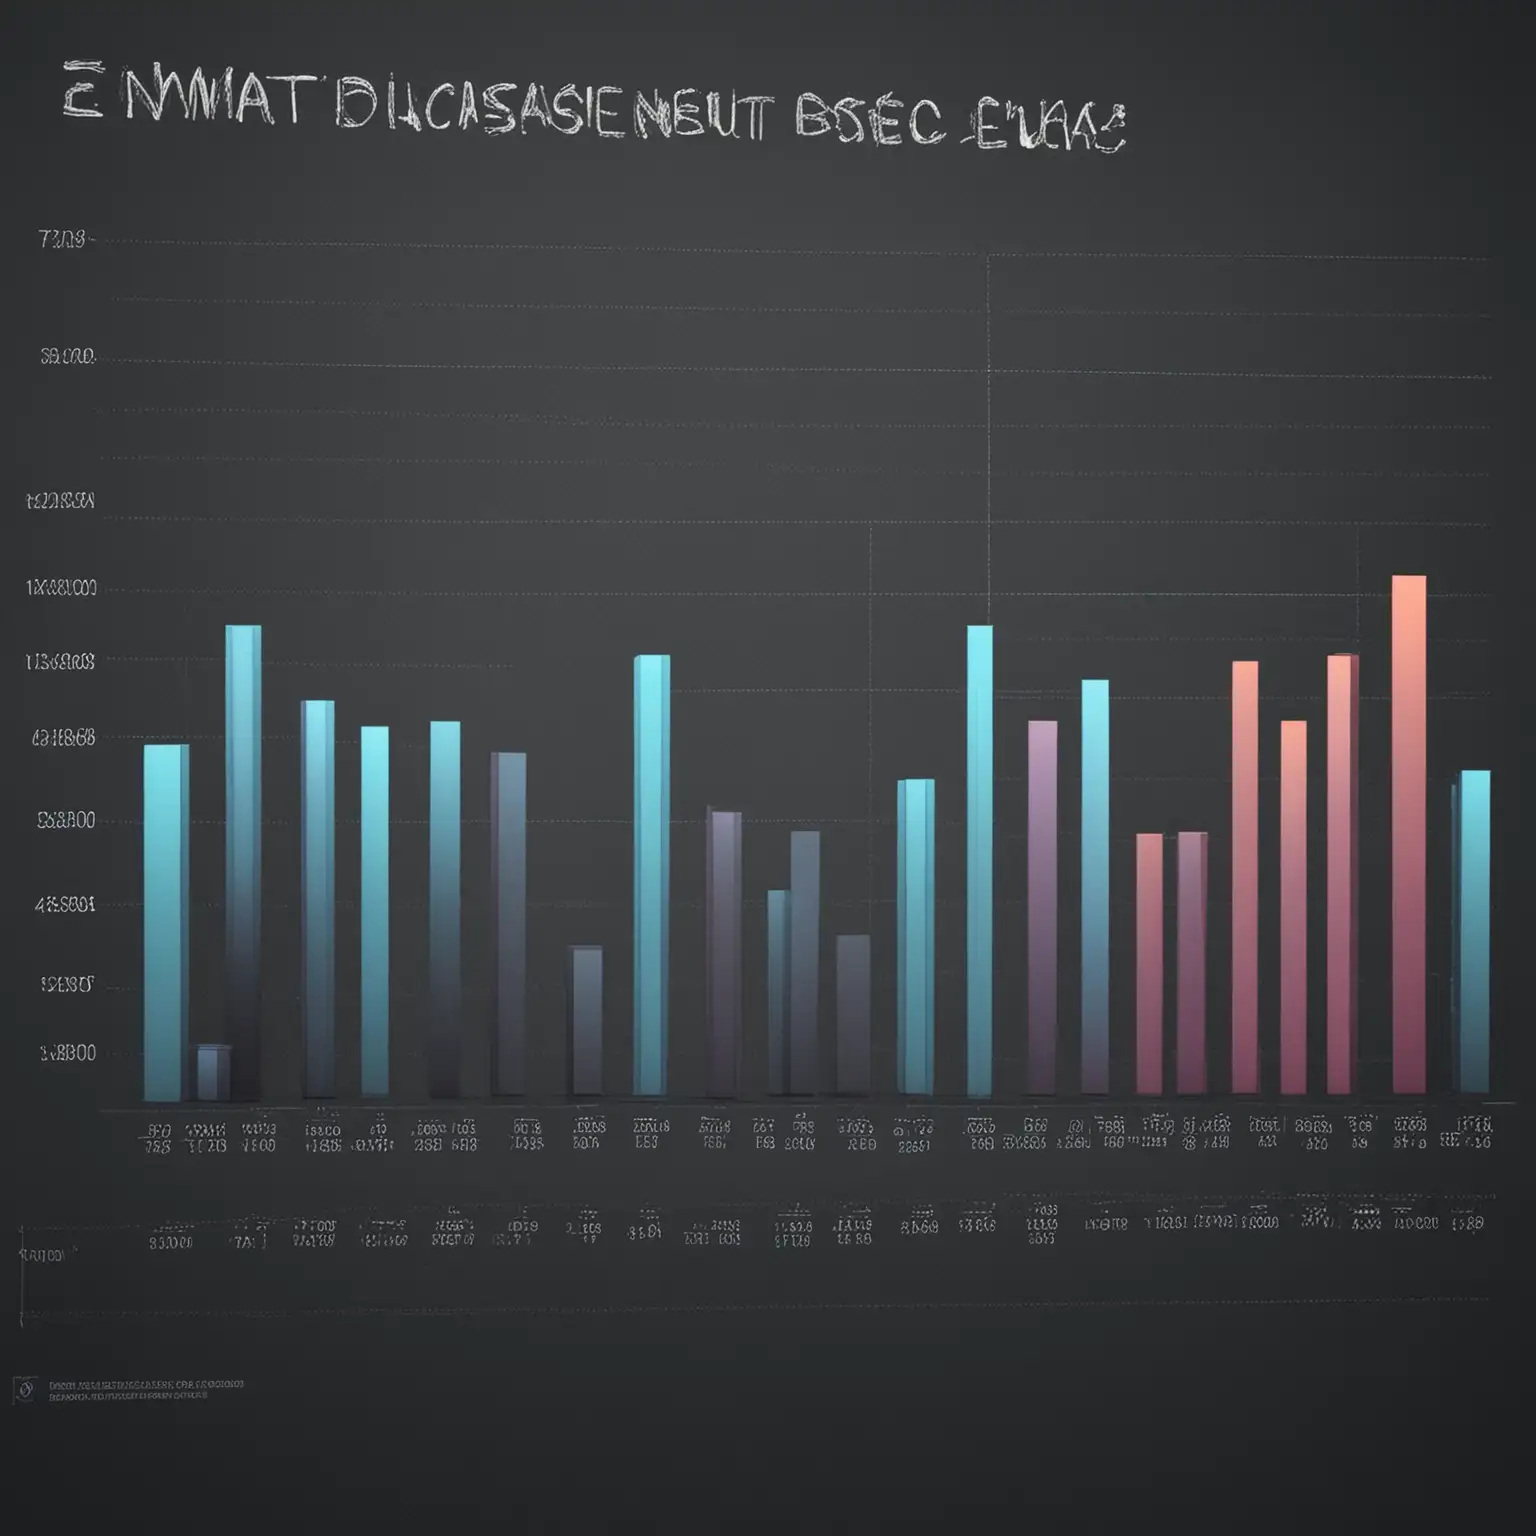 Abstract Stock Market Bar Chart in High Resolution